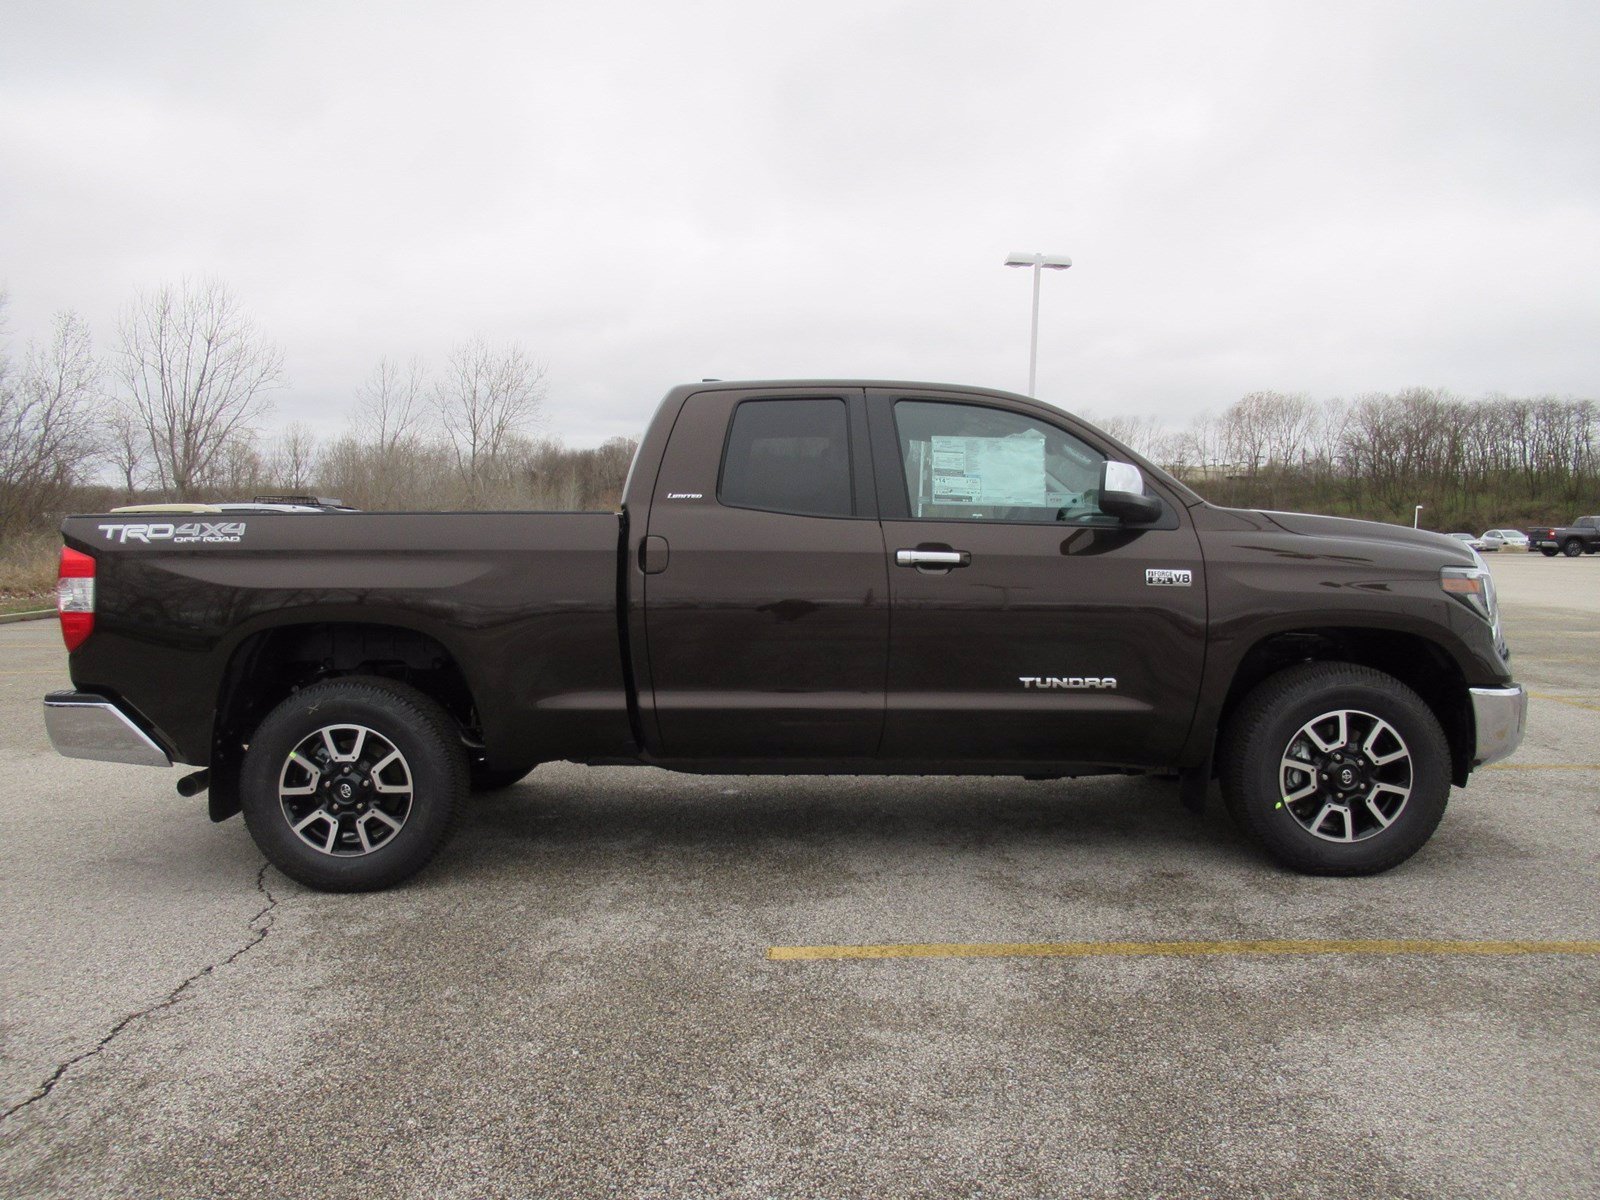 New 2020 Toyota Tundra 4WD Limited Crew Cab Pickup in St. Peters #